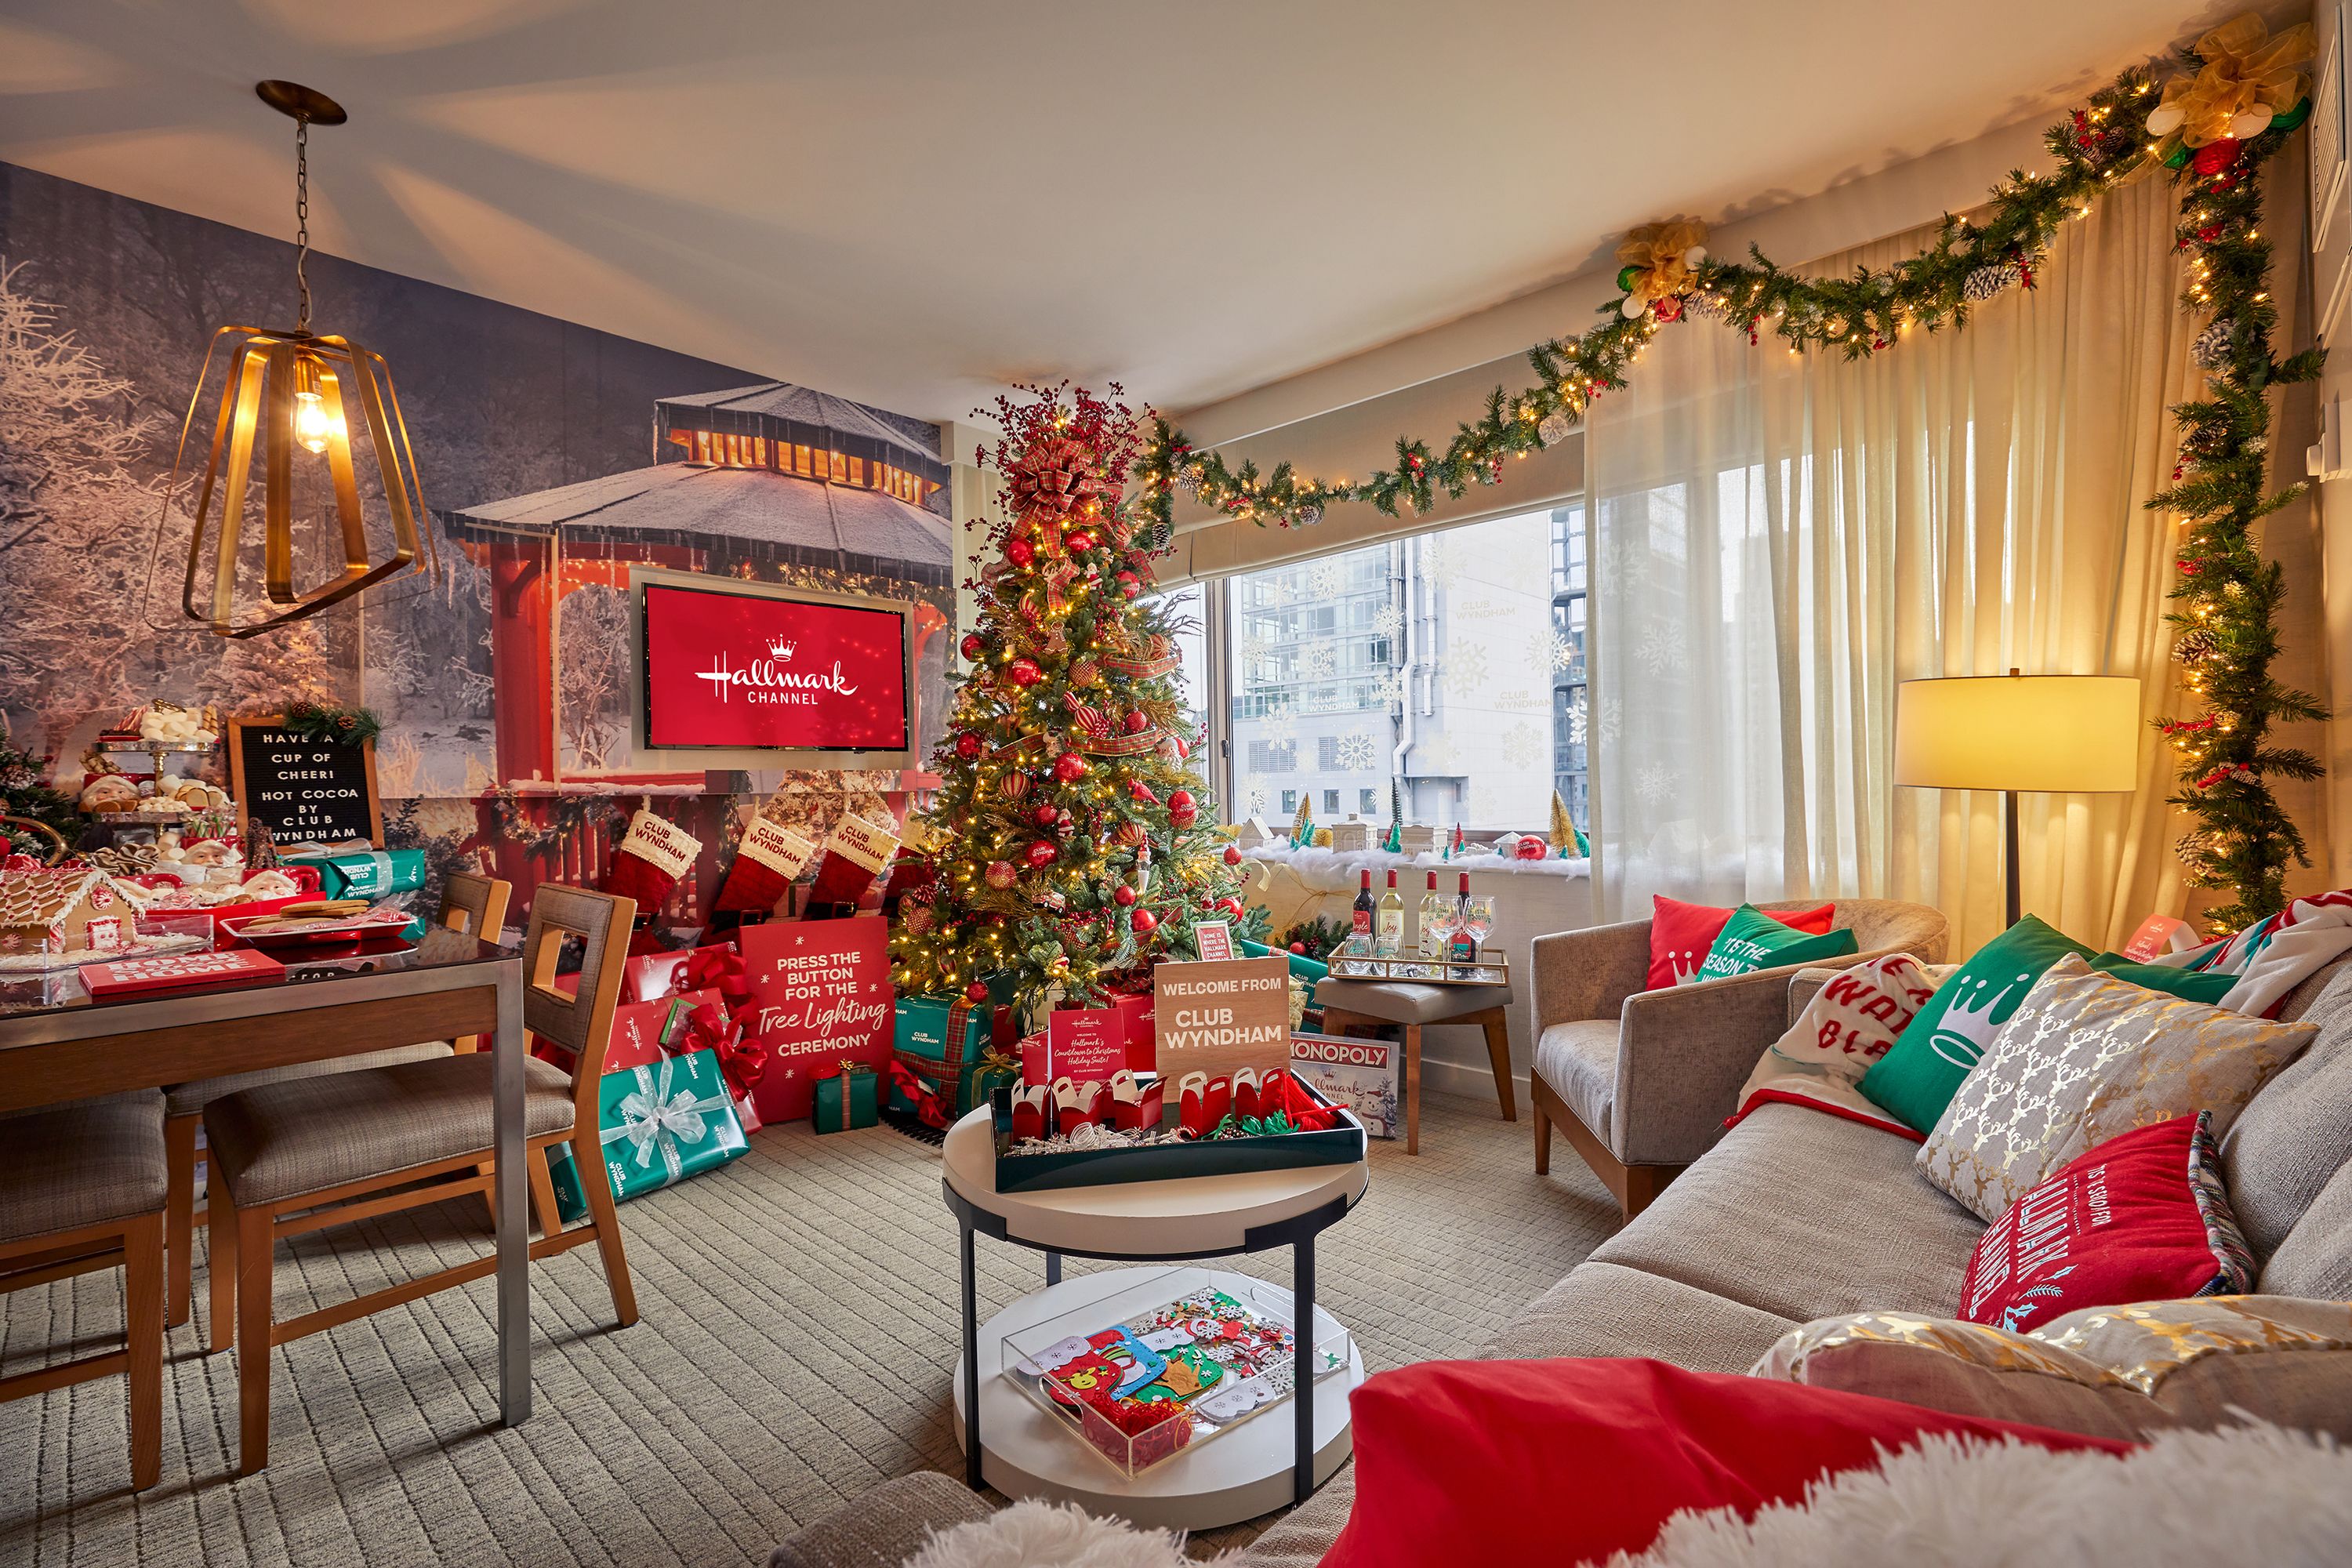 10 Creative Ideas for decorate hotel room for christmas that you will love